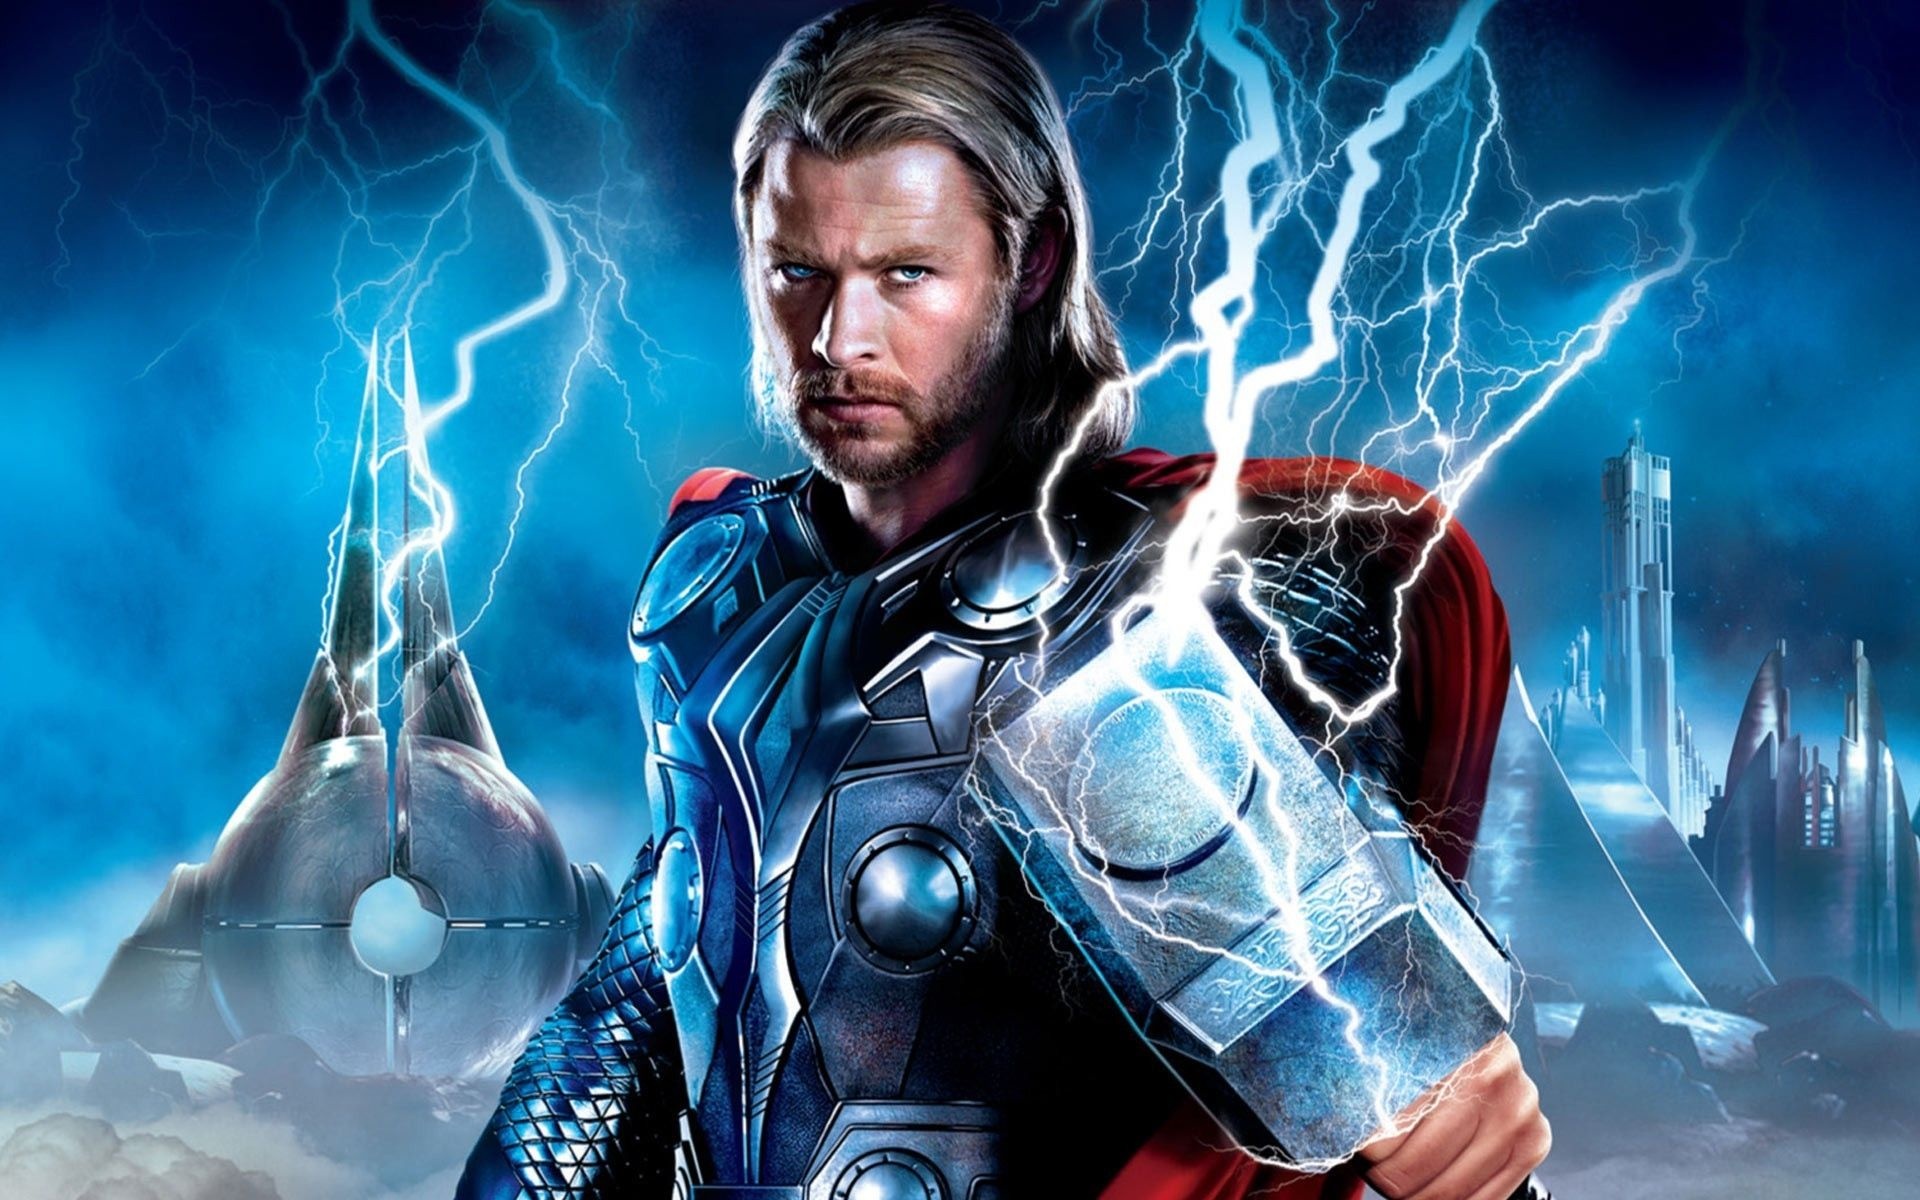 Thor, Top HD wallpapers, Download for free, High-quality images, 1920x1200 HD Desktop